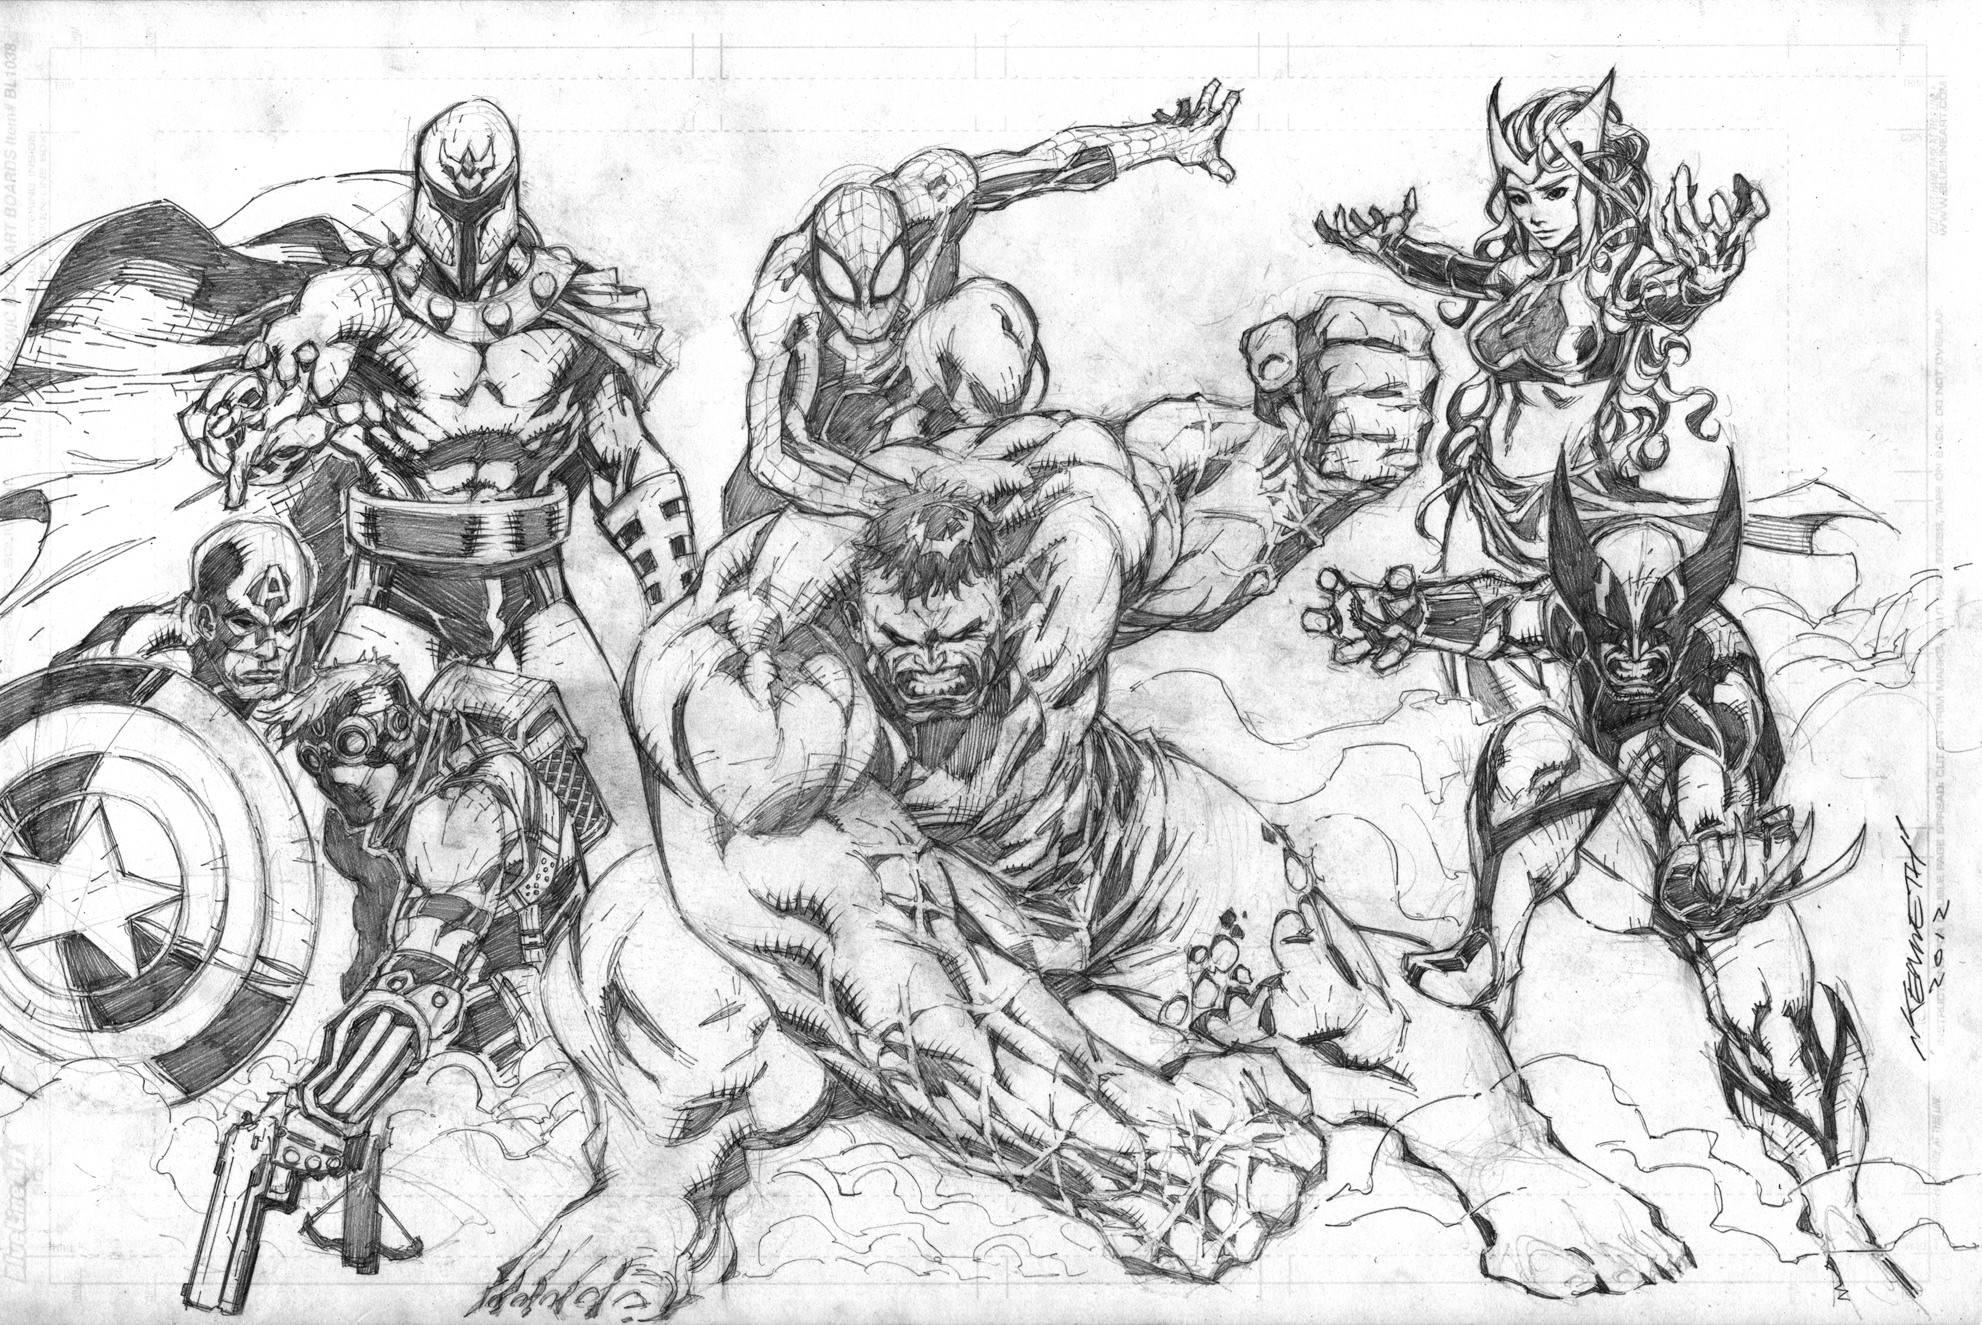 Marvel Superhero Drawings at Explore collection of